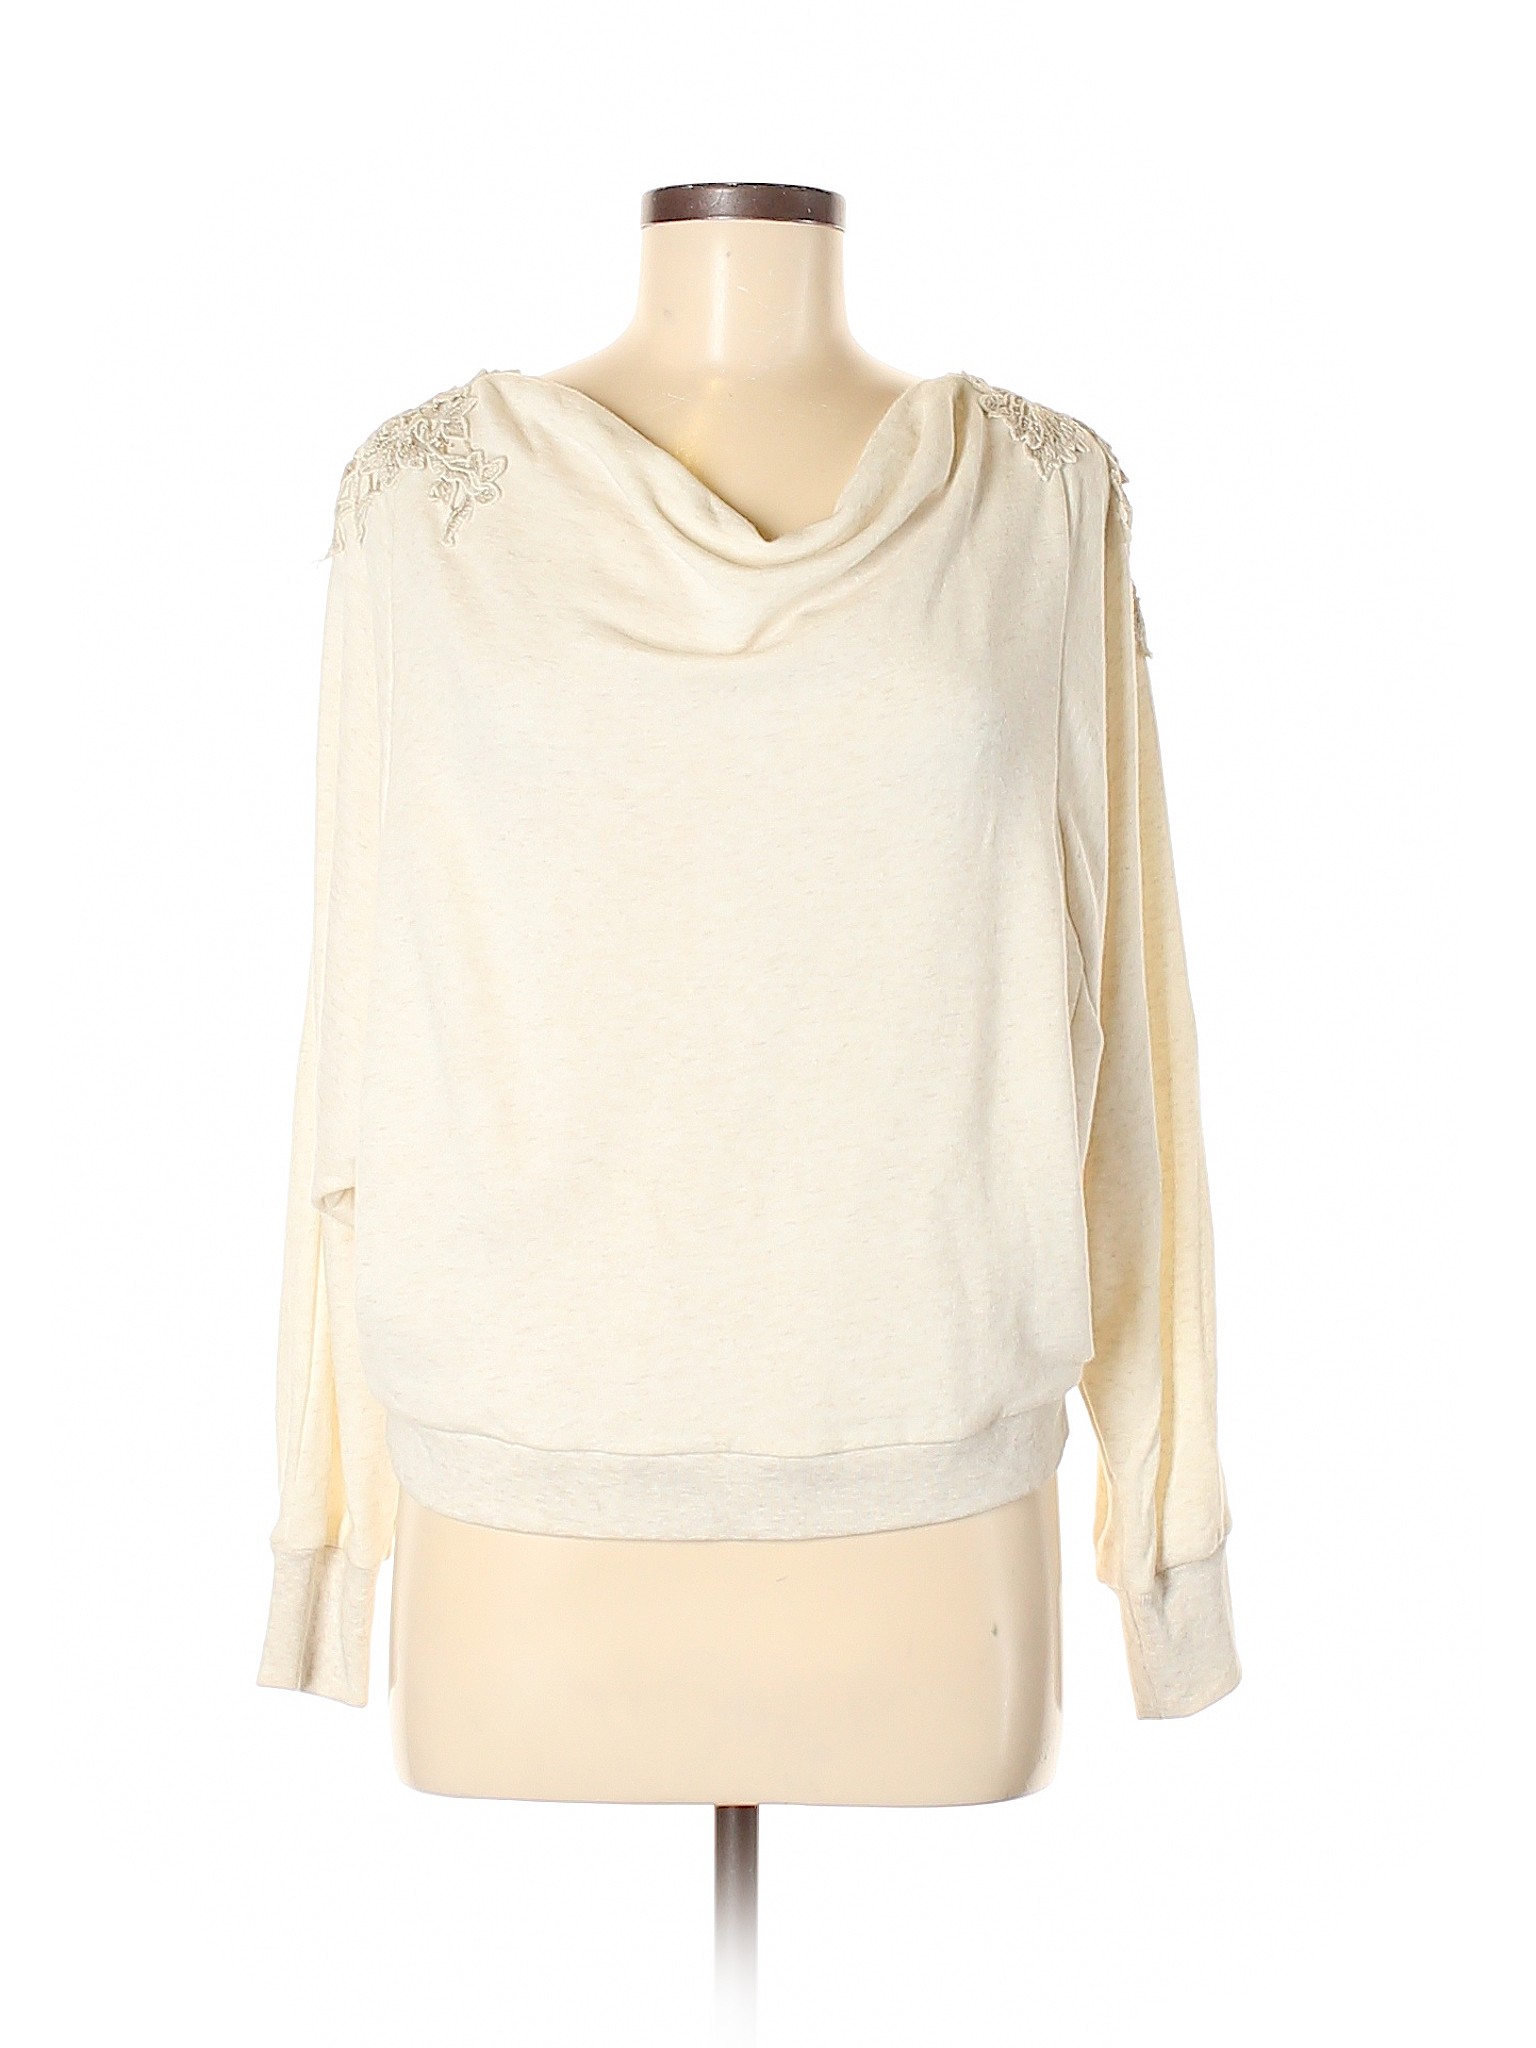 Meadow Rue Lace Ivory Sweatshirt Size S - 81% off | thredUP